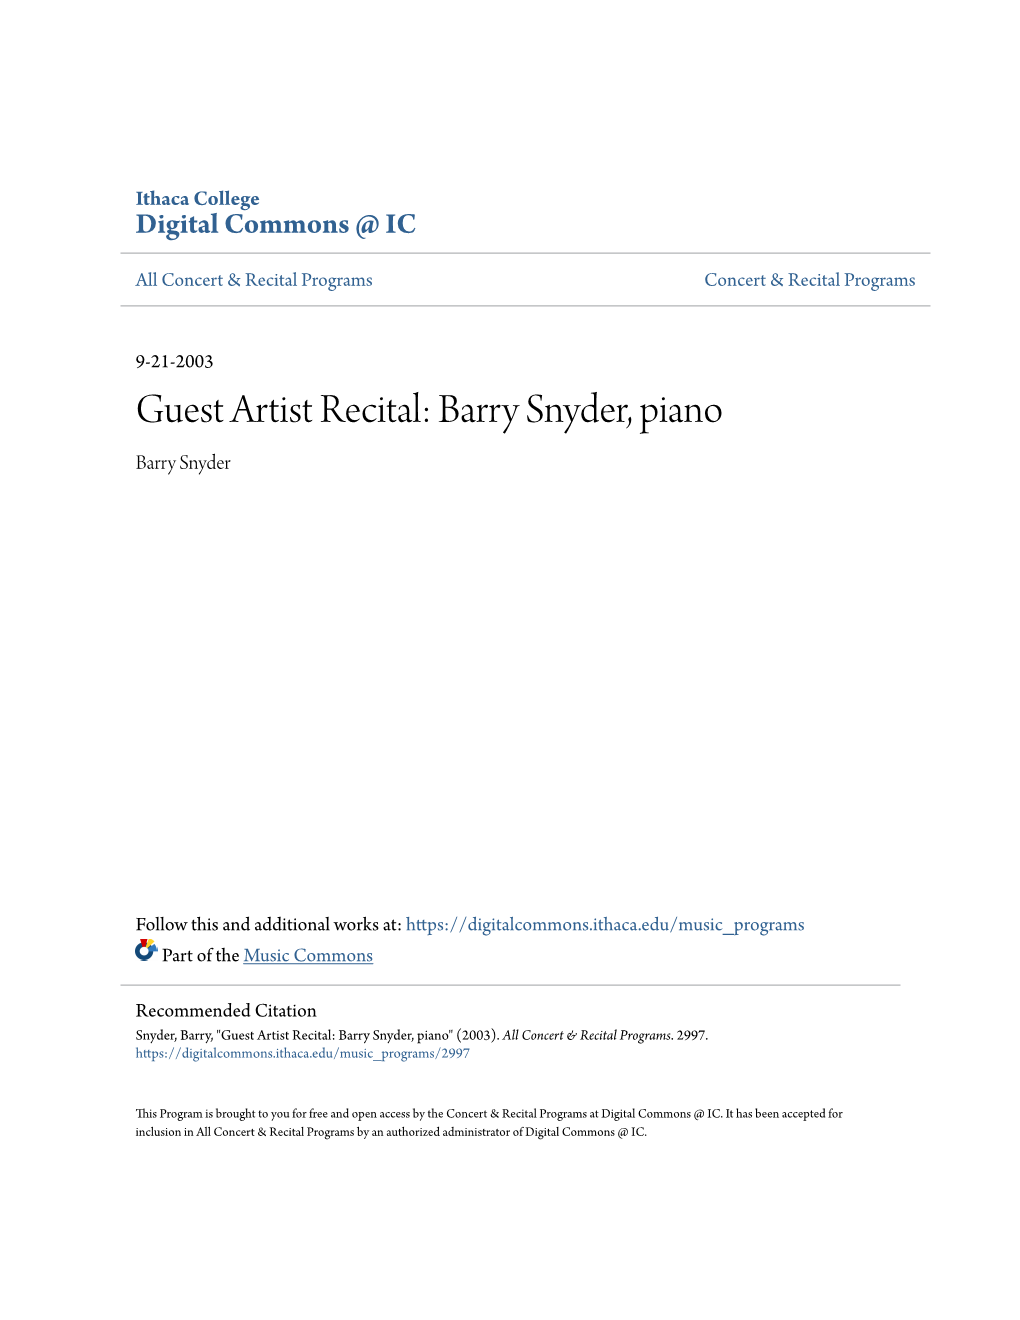 Guest Artist Recital: Barry Snyder, Piano Barry Snyder